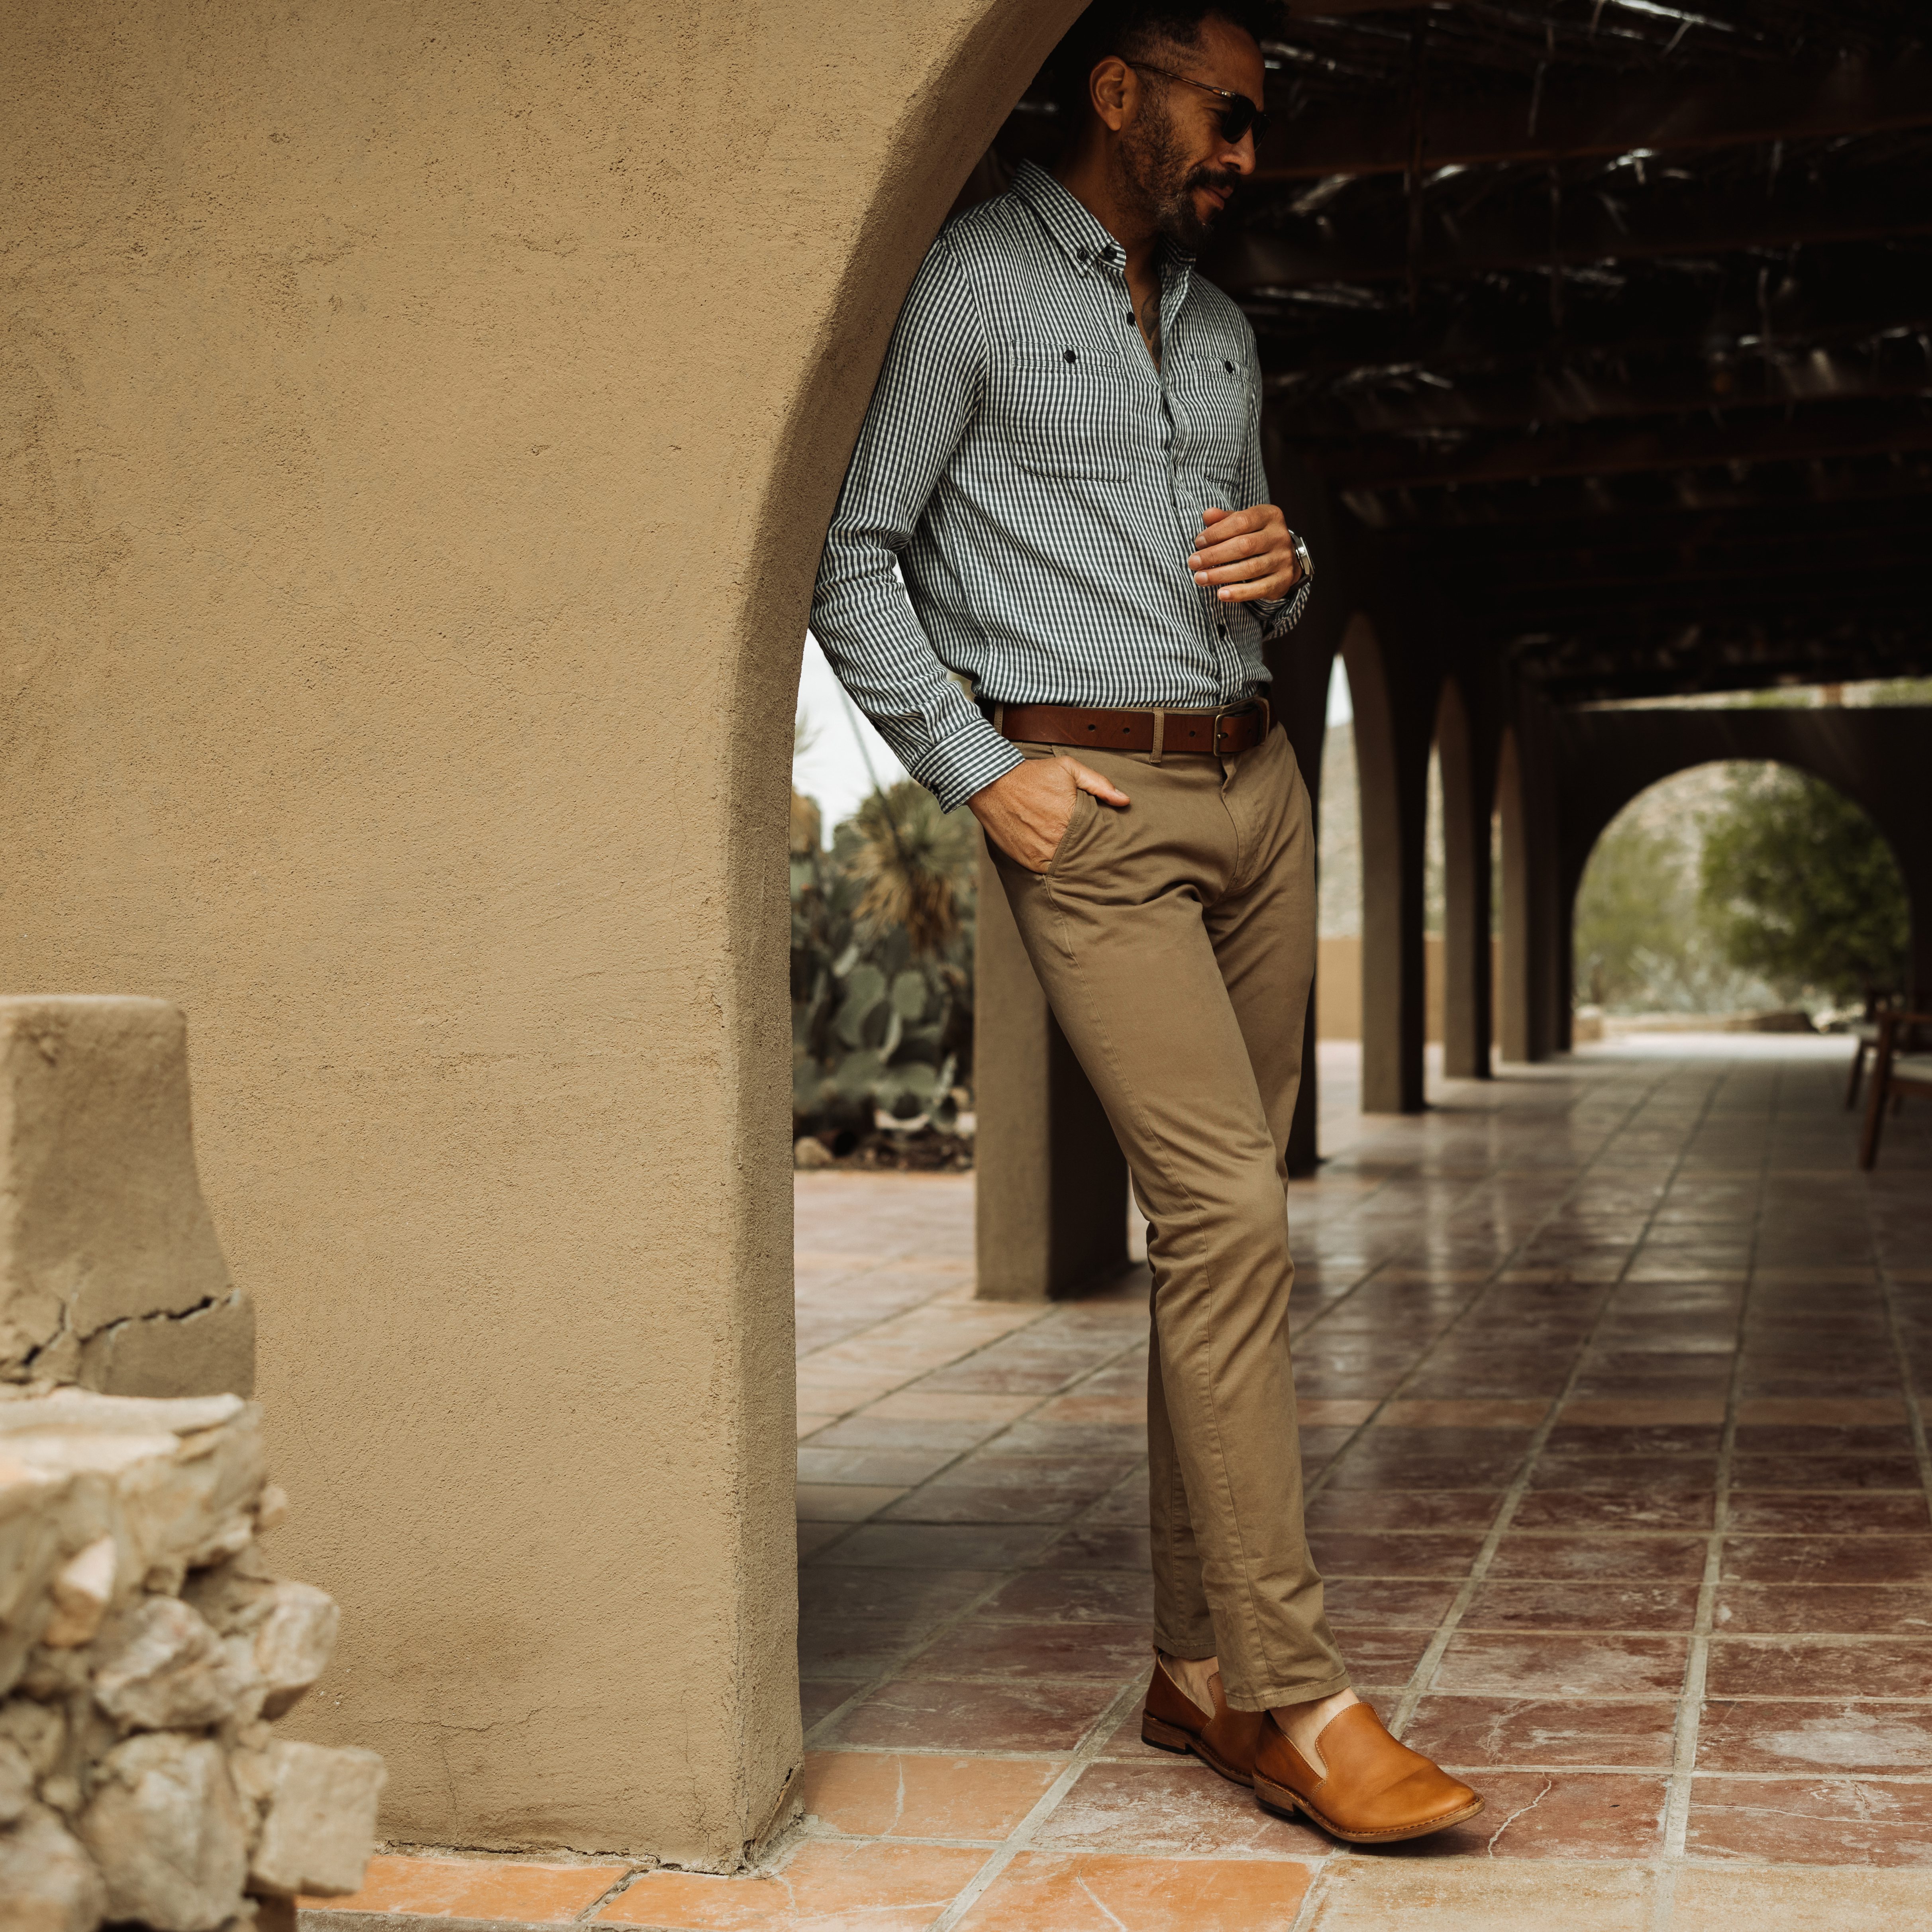 10 Best Chinos: The Complete Chinos Guide for Men - APPARELillustrated